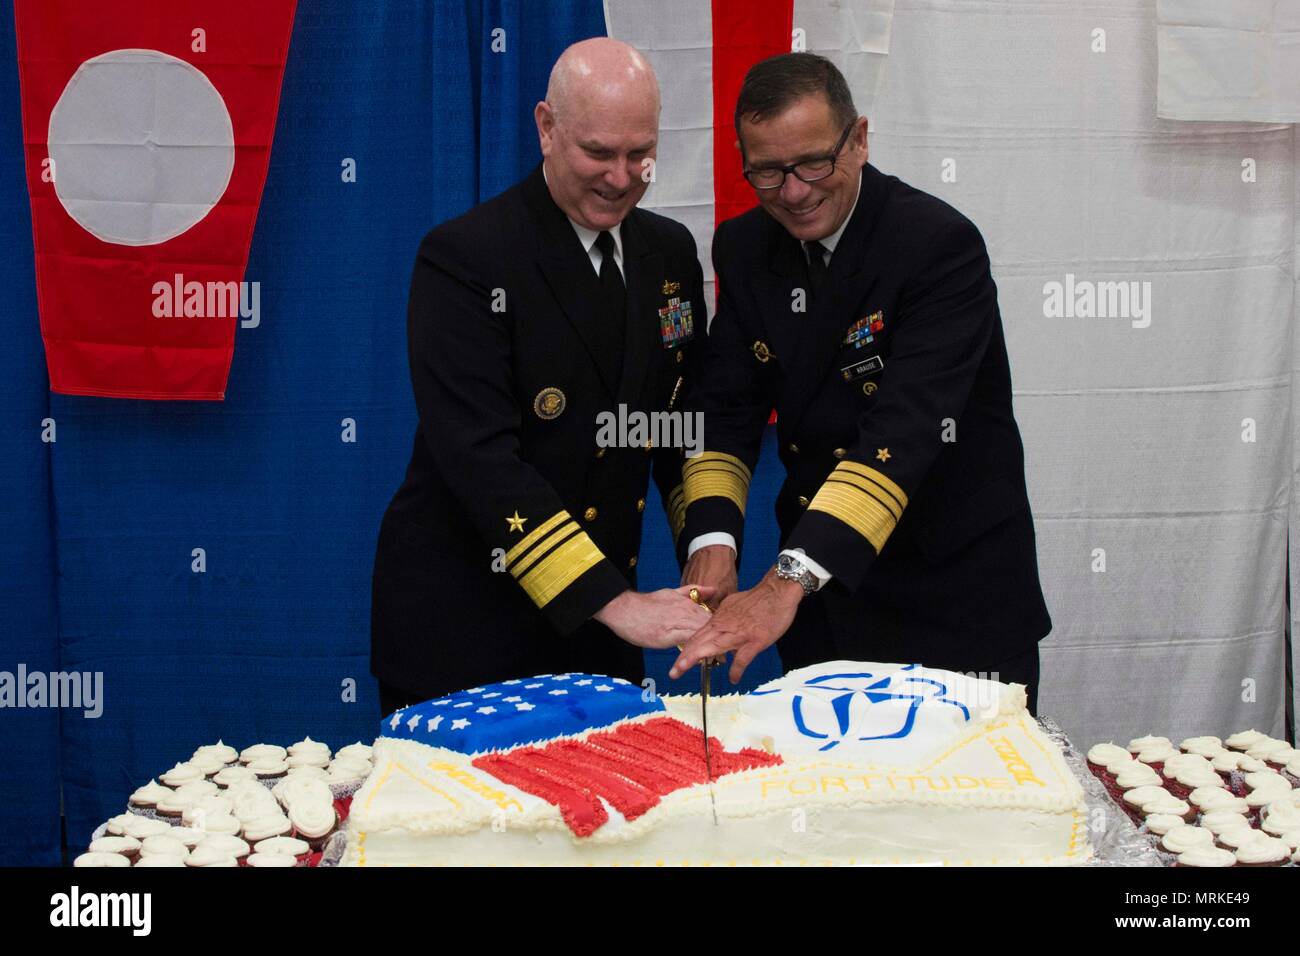 170616-N-GG458-124 KIEL, Germany (June 16, 2017) Vice Adm. Christopher Grady, commander, Naval Striking and Support Forces NATO, left, and German Navy Vice Adm. Andreas Krause, Inspector of the German Navy, cut a cake at a reception aboard the San Antonio-class amphibious transport dock ship USS Arlington (LPD 24) during exercise BALTOPS 2017, June 16. BALTOPS 17 is the premier annual maritime-focused exercise in the Baltic region and one of the largest exercises in Northern Europe. (U.S. Navy photo by Mass Communication Specialist 2nd Class Stevie Tate/Released) Stock Photo